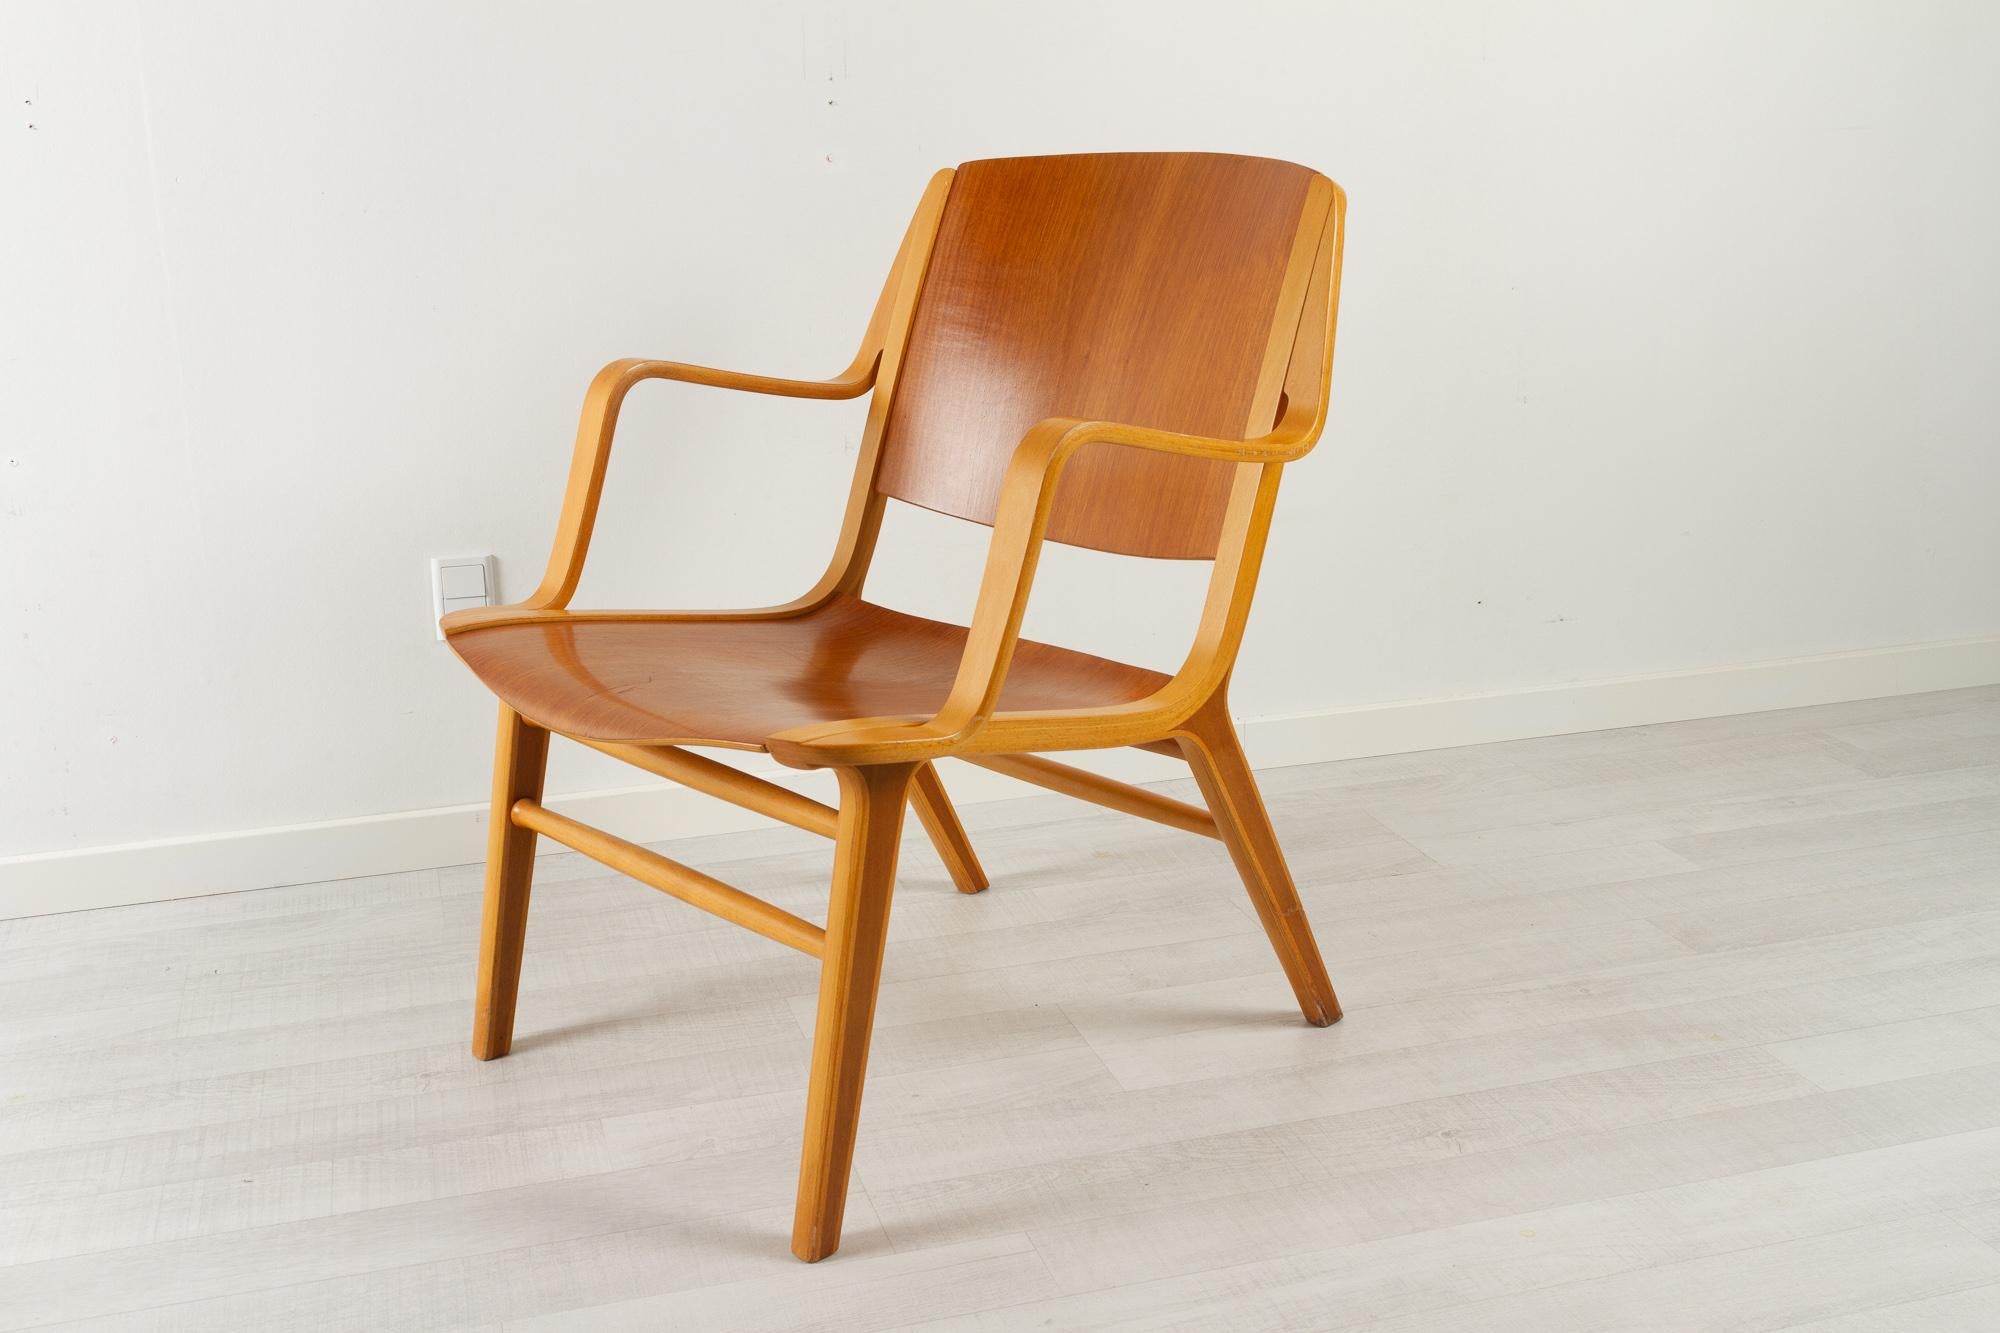 Danish modern axe armchair by Hvidt & Mølgaard 1960s
Danish Mid-Century Modern easy chair designed by Peter Hvidt and Orla Mølgaard-Nielsen in 1947 and manufactured by Fritz Hansen, Denmark in 1966.

Beautiful and elegant lounge chair named the